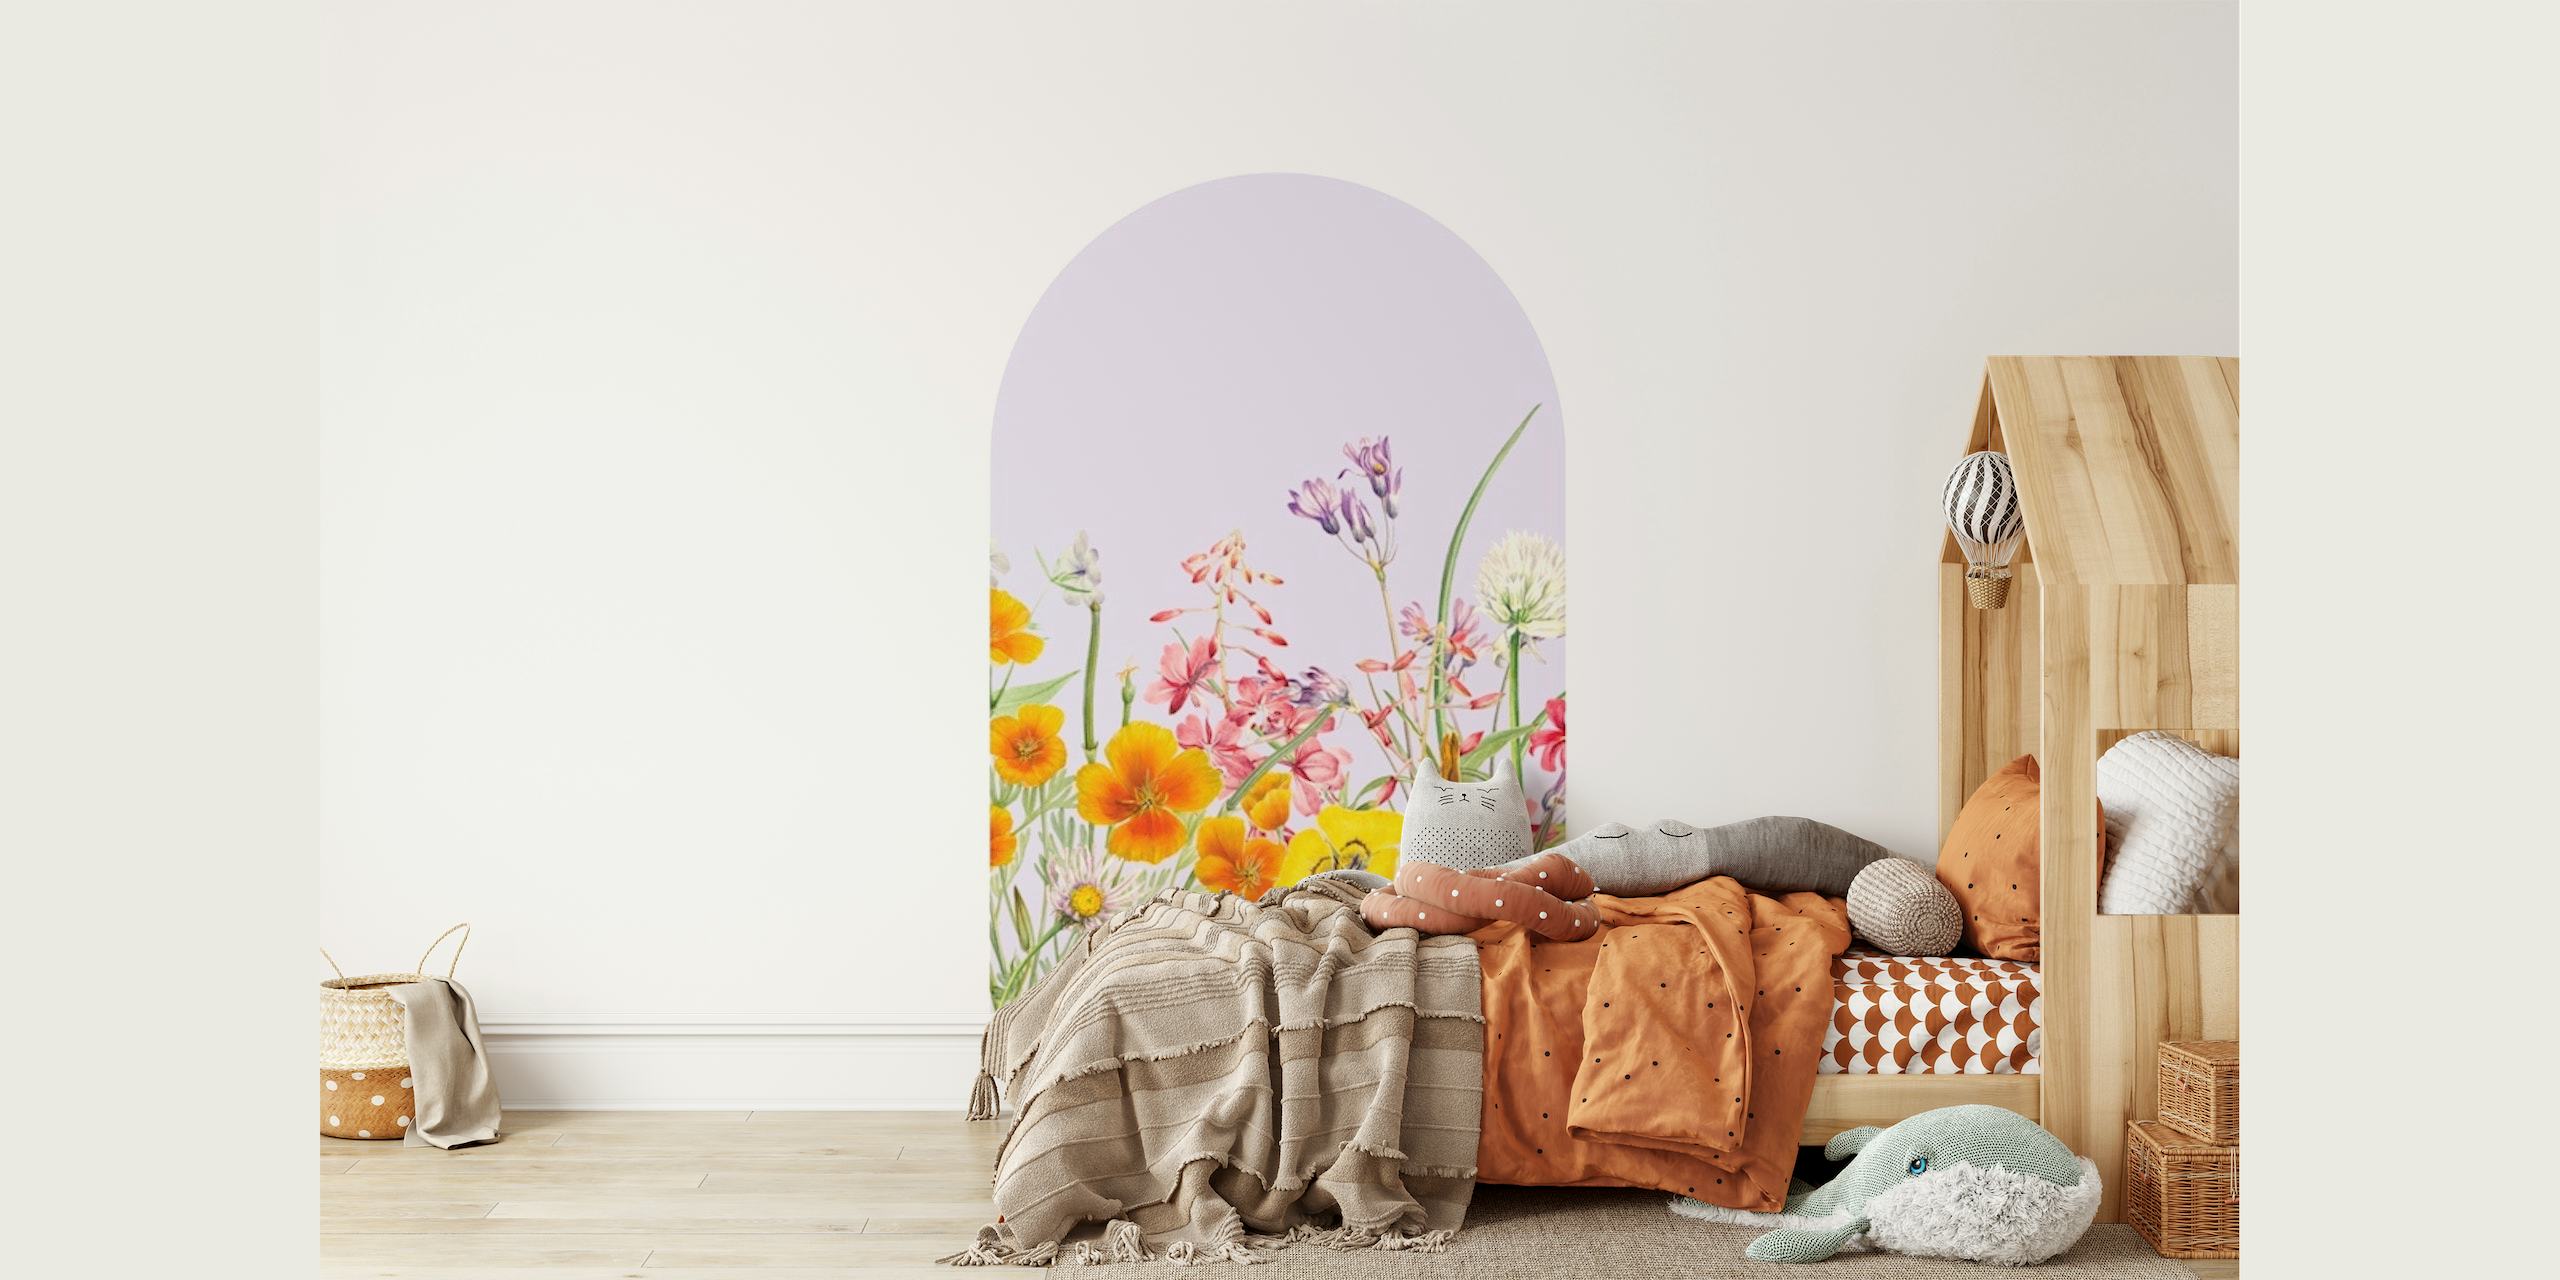 Pastel Floral Arch wall mural with wildflowers in soft hues